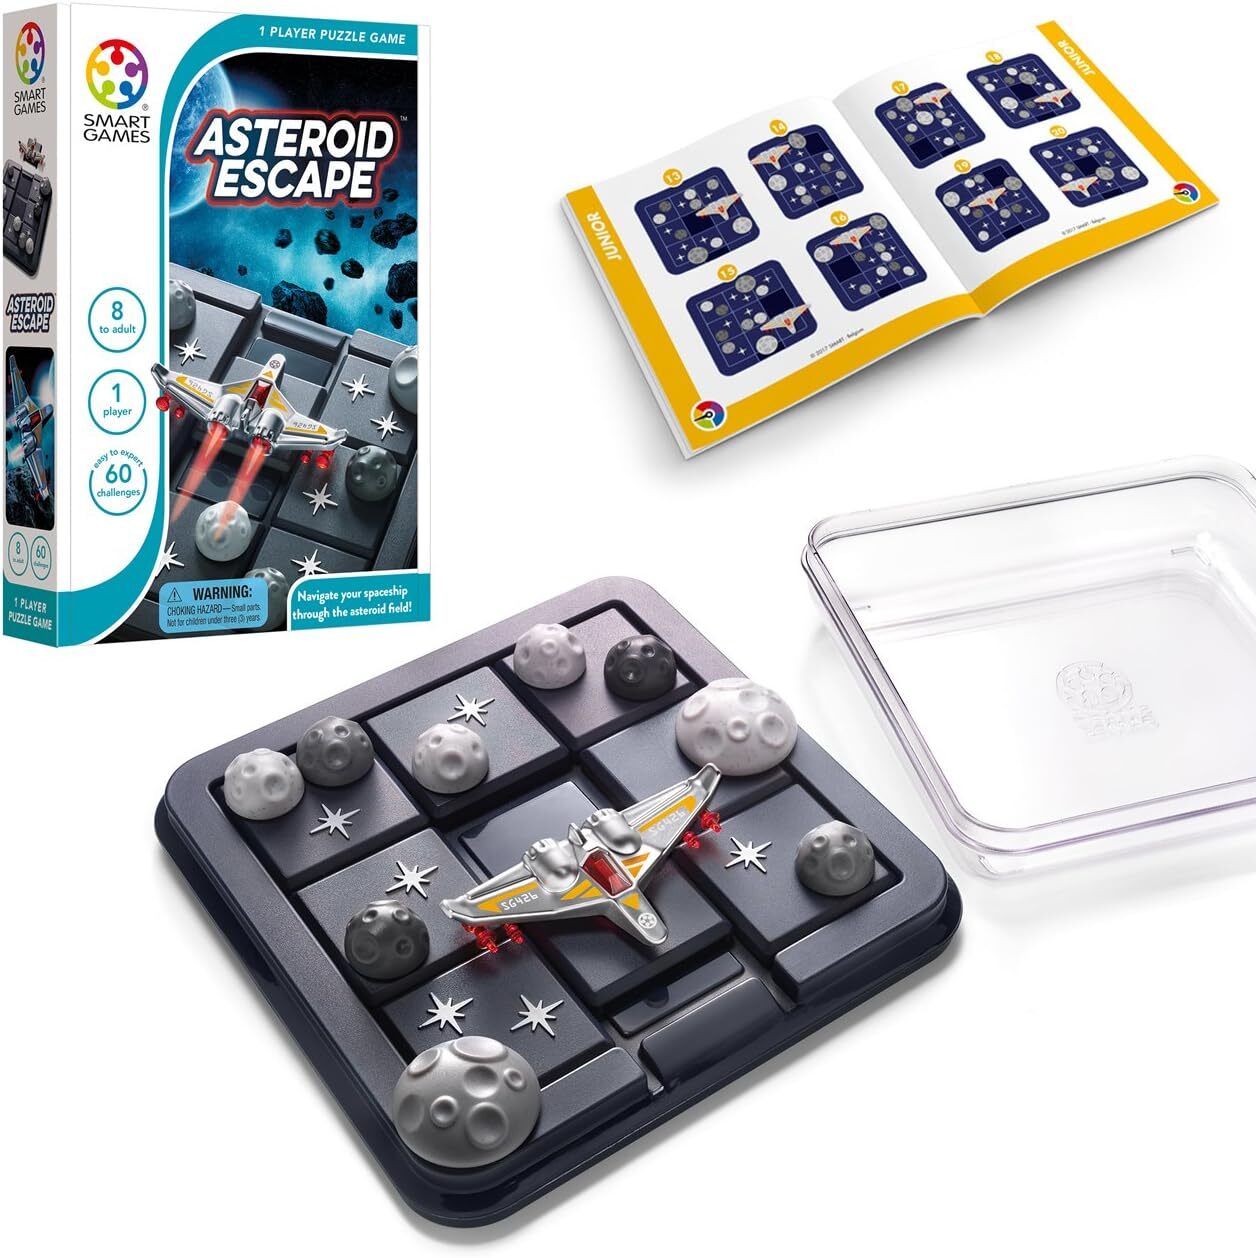 Buffalo Games - Puzzle Sorting Trays